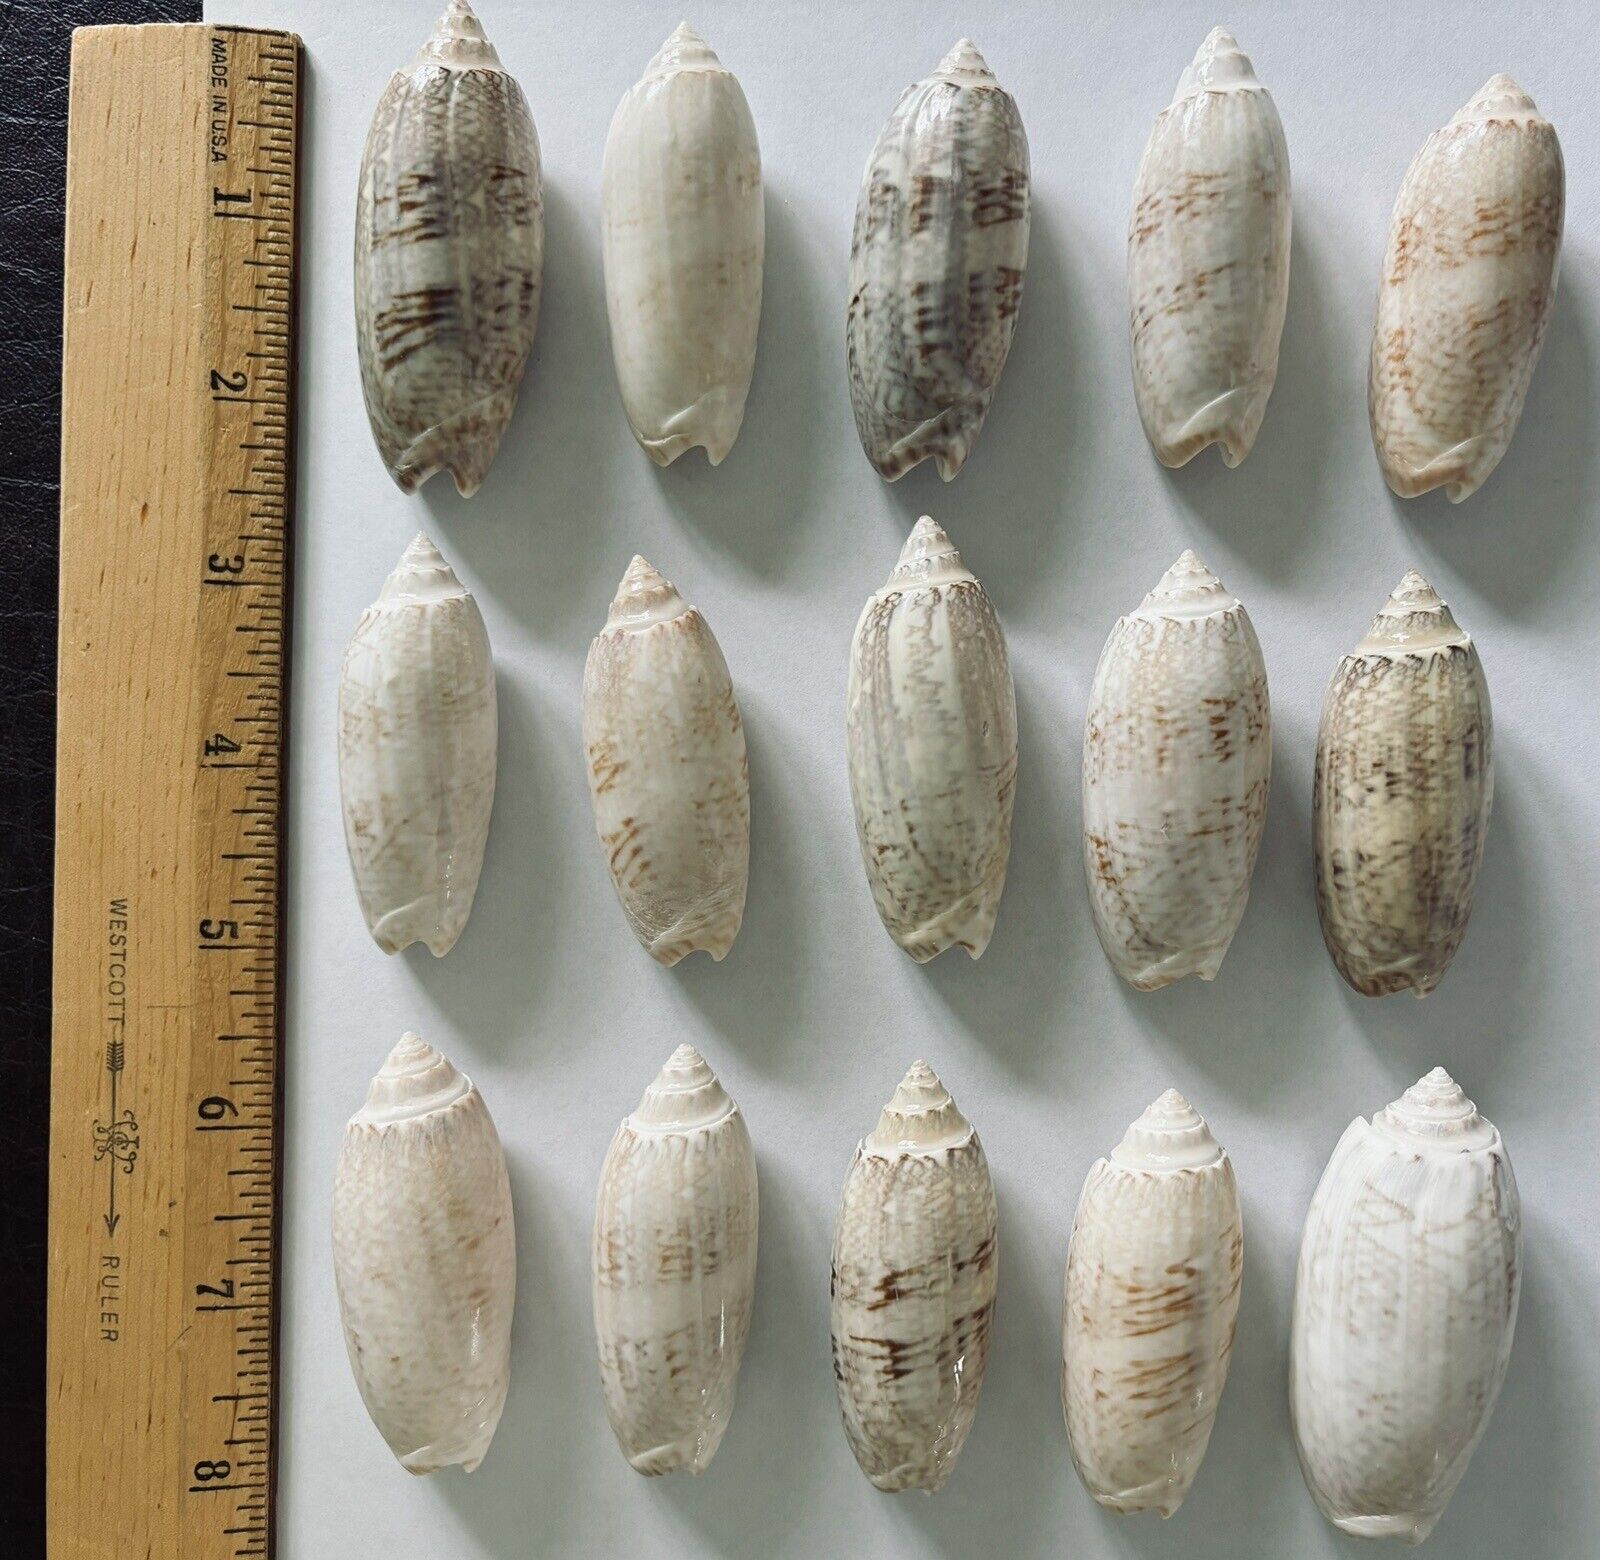 15 Large Olive Seashells From Sanibel Island, Florida Approx.  2 To 2.5  Inches